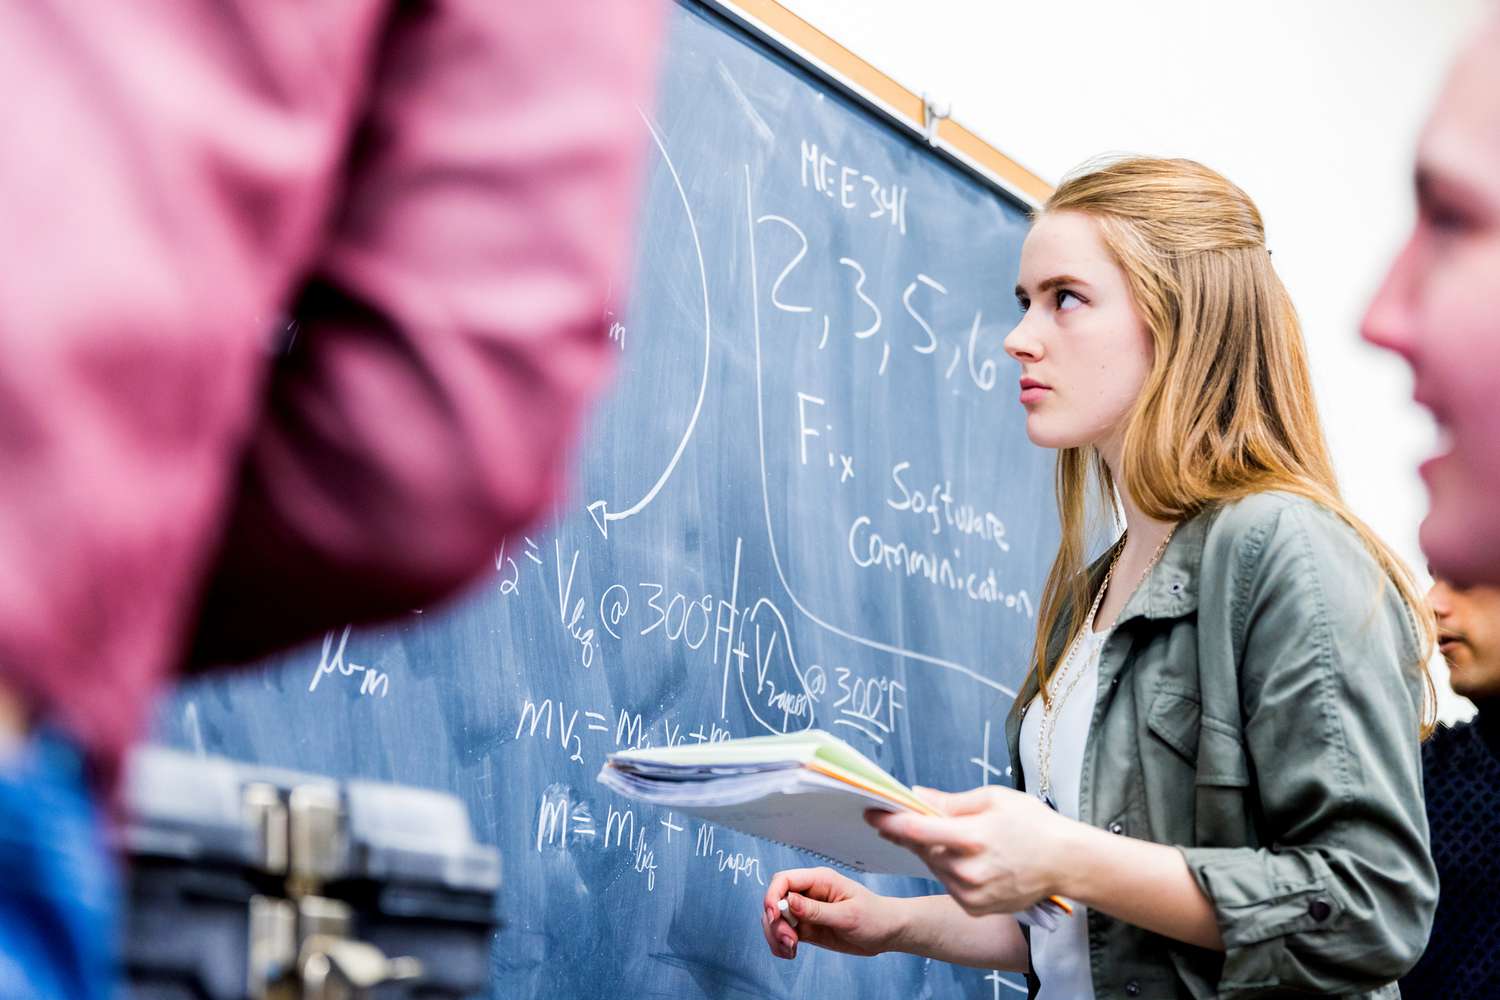 Students looking at a blackboard in math class.